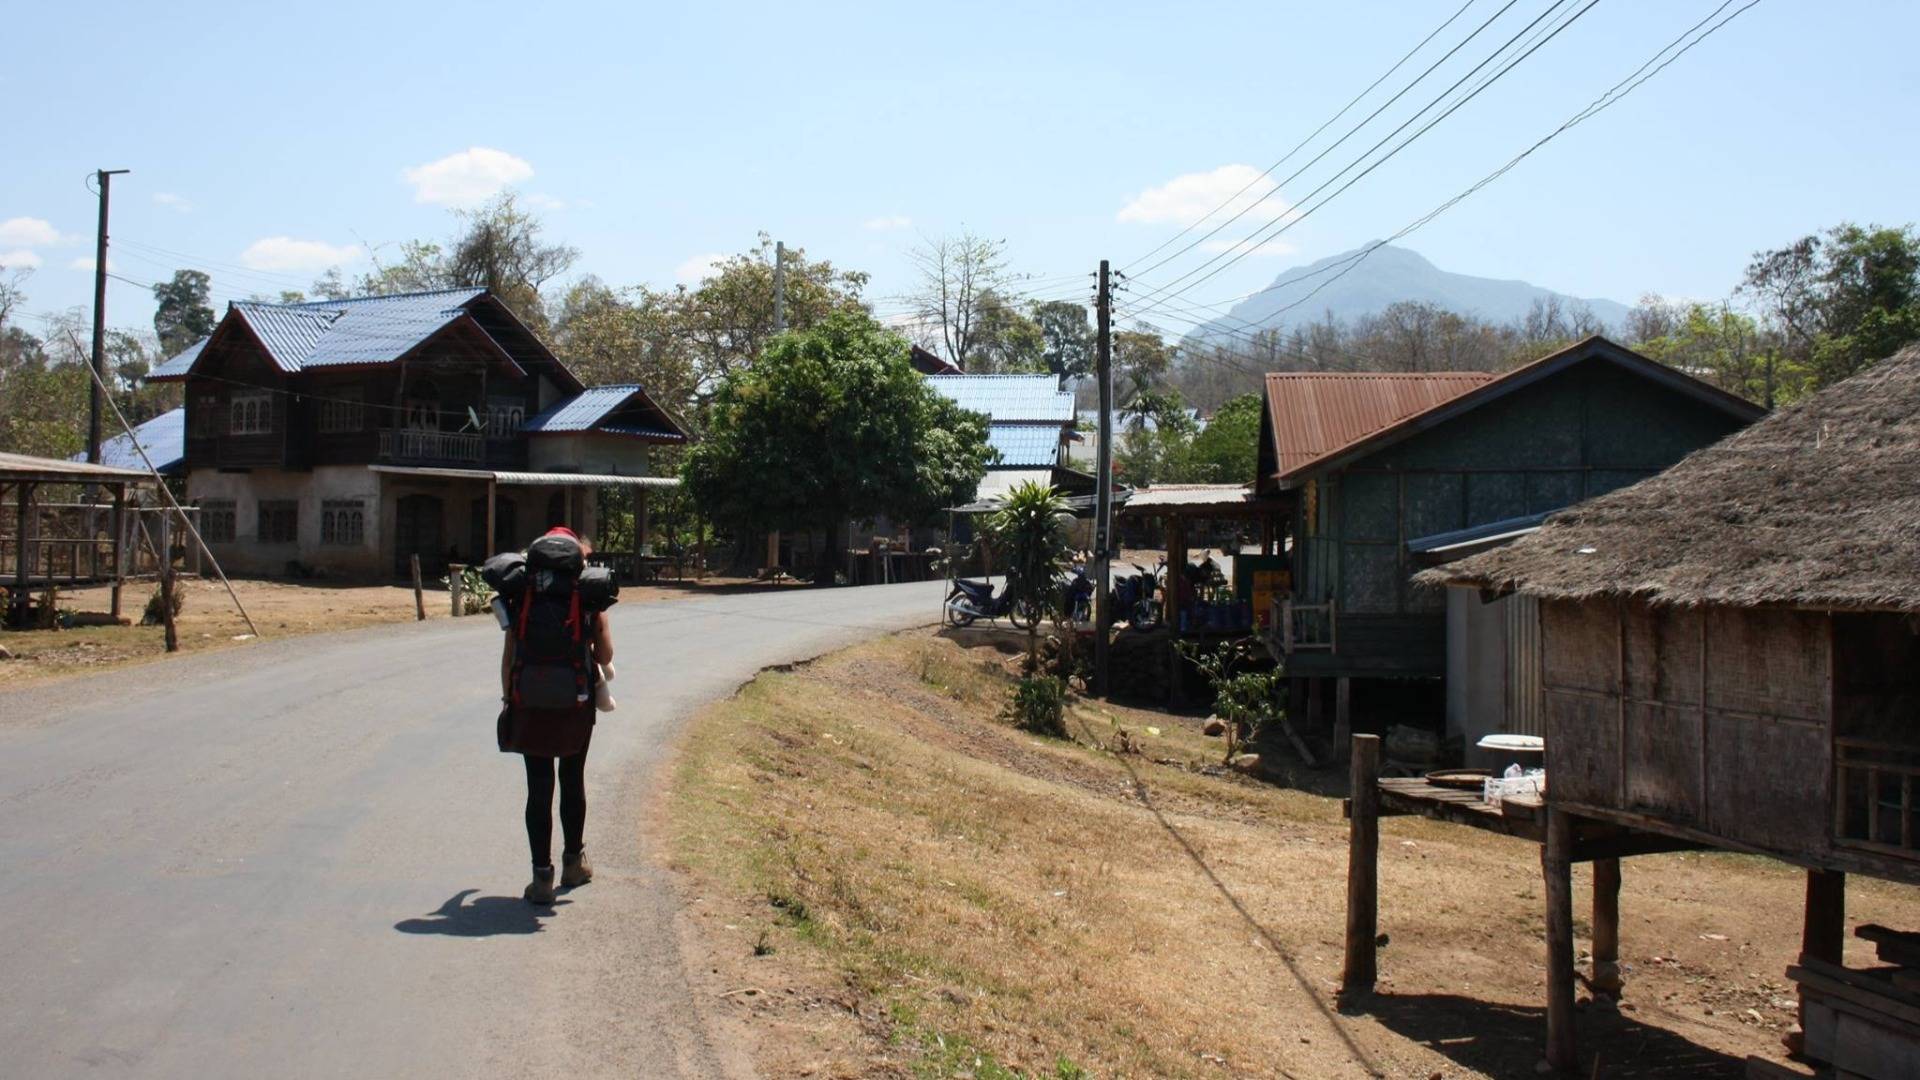 A typical village in South East Asia